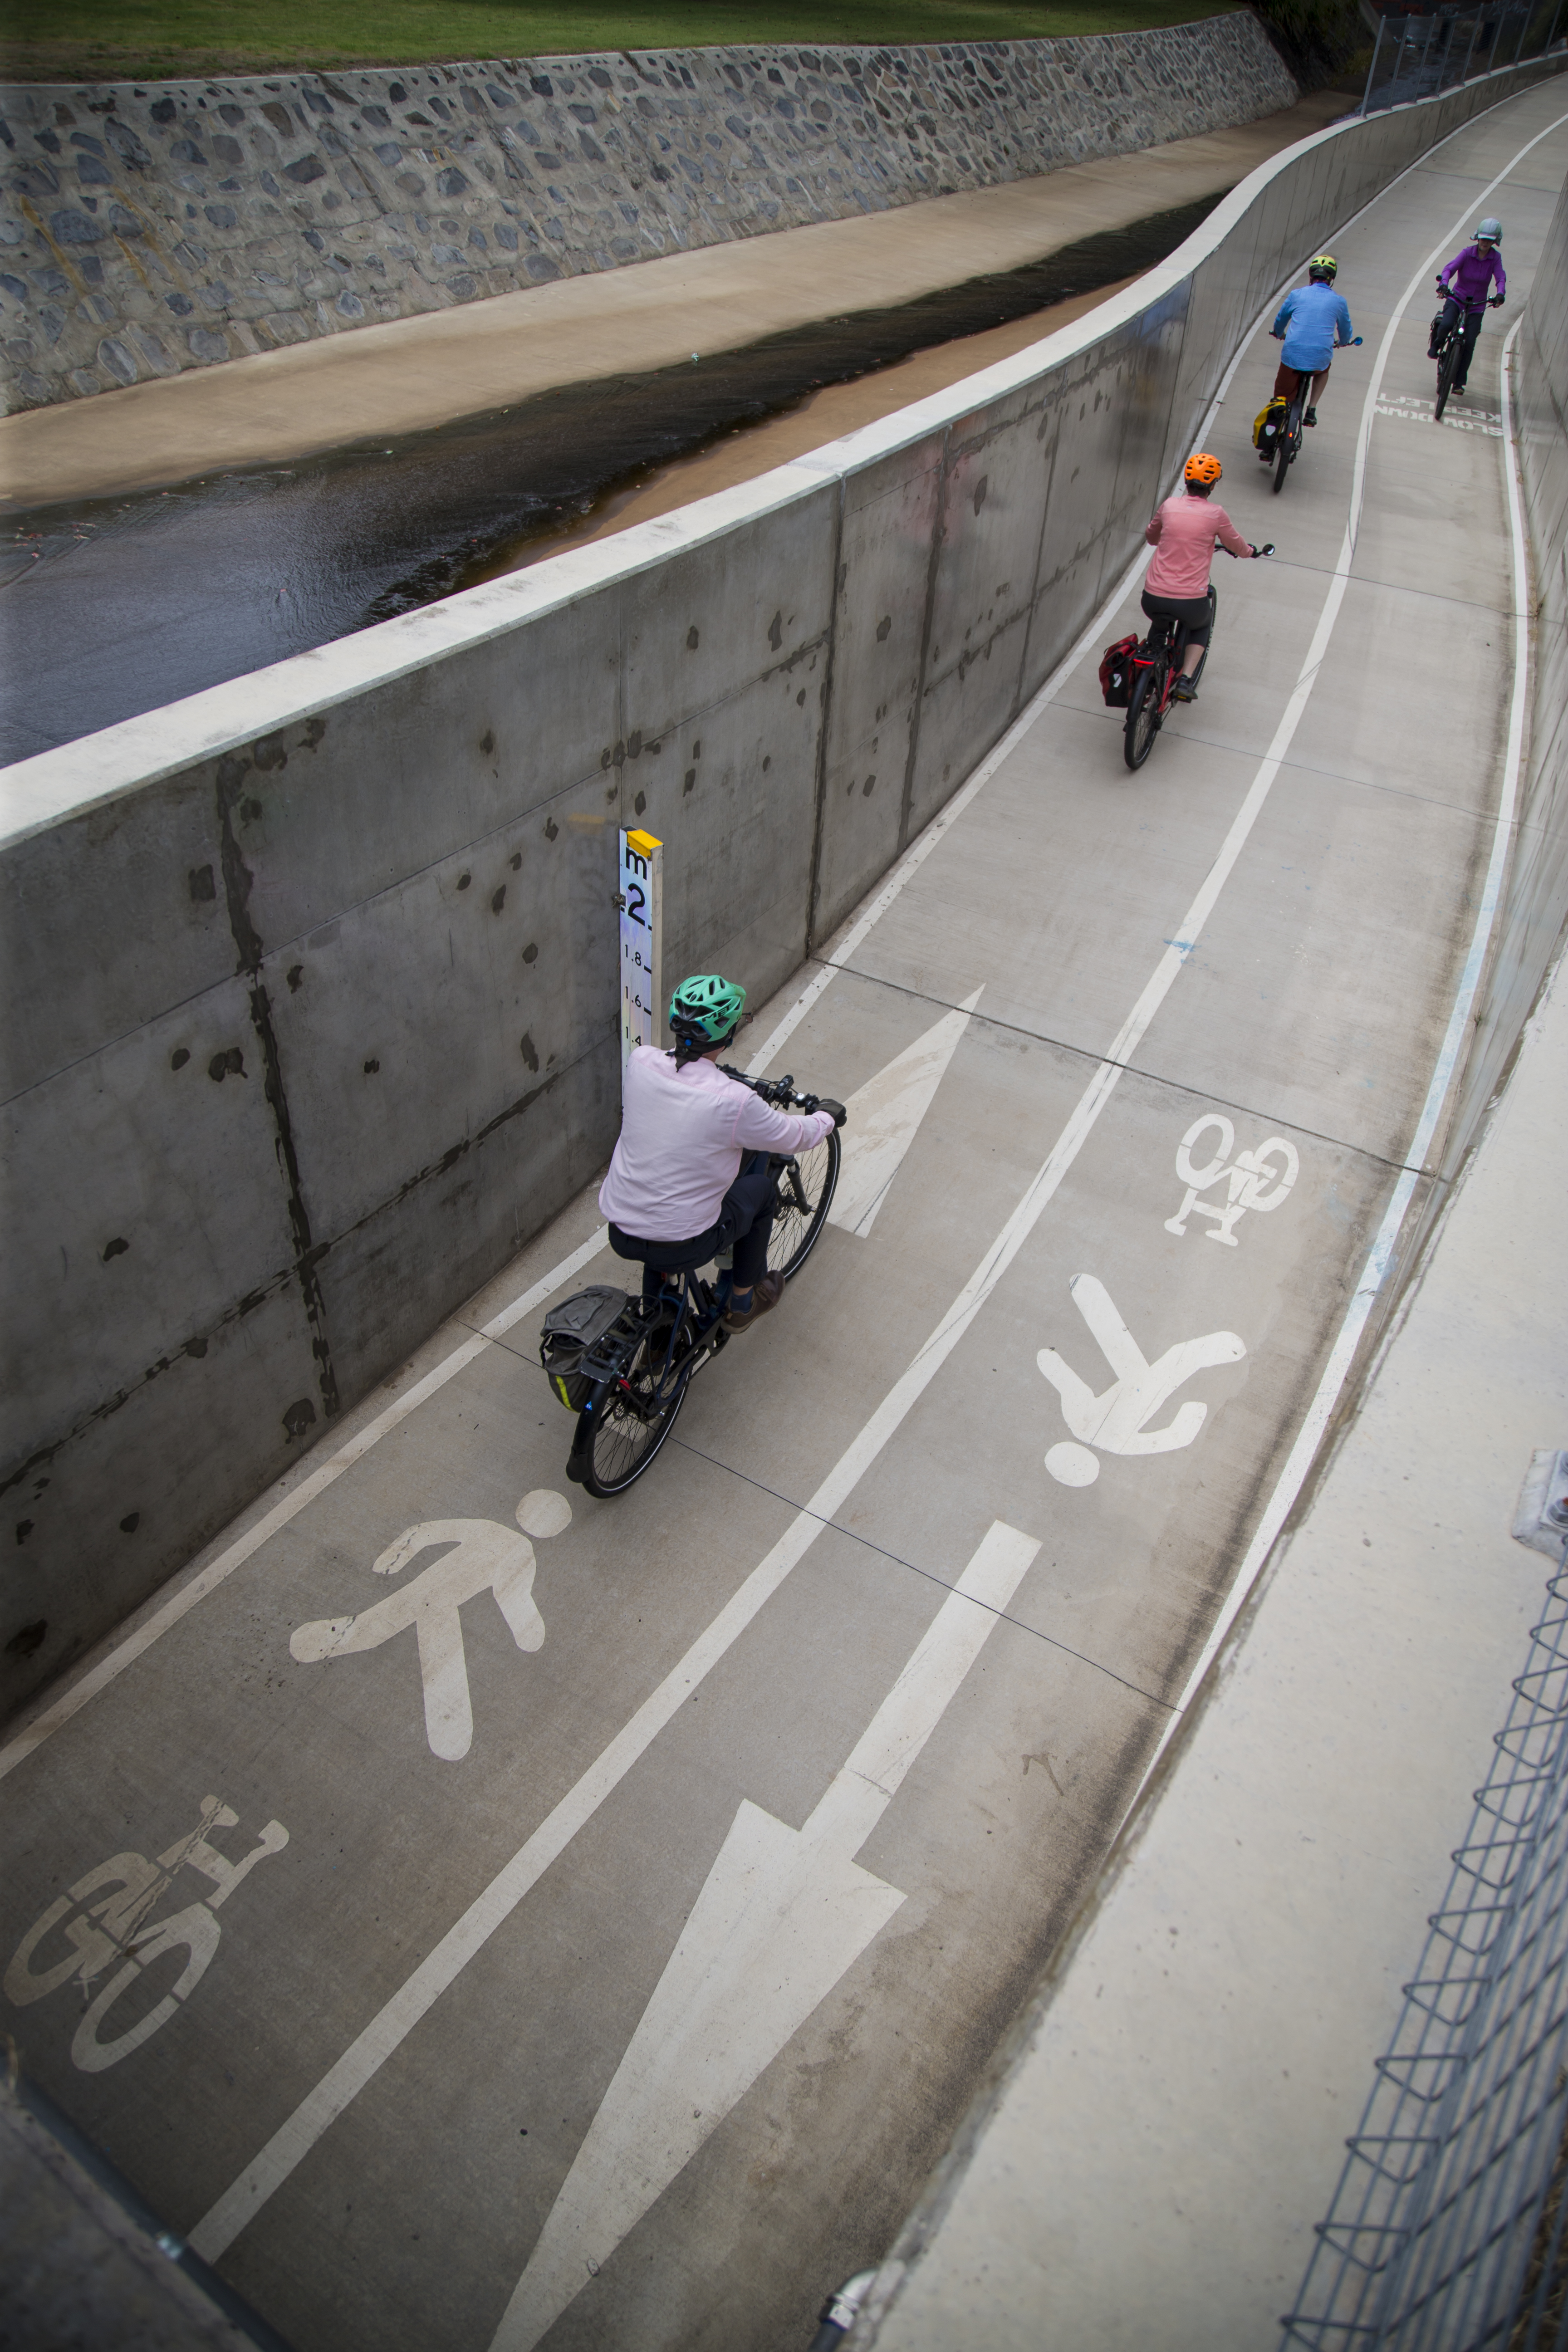 People on bikes come through a concentre underpass with pictures of arrows, stick figures and bicycle showing the direction and which side of the path they can go. 